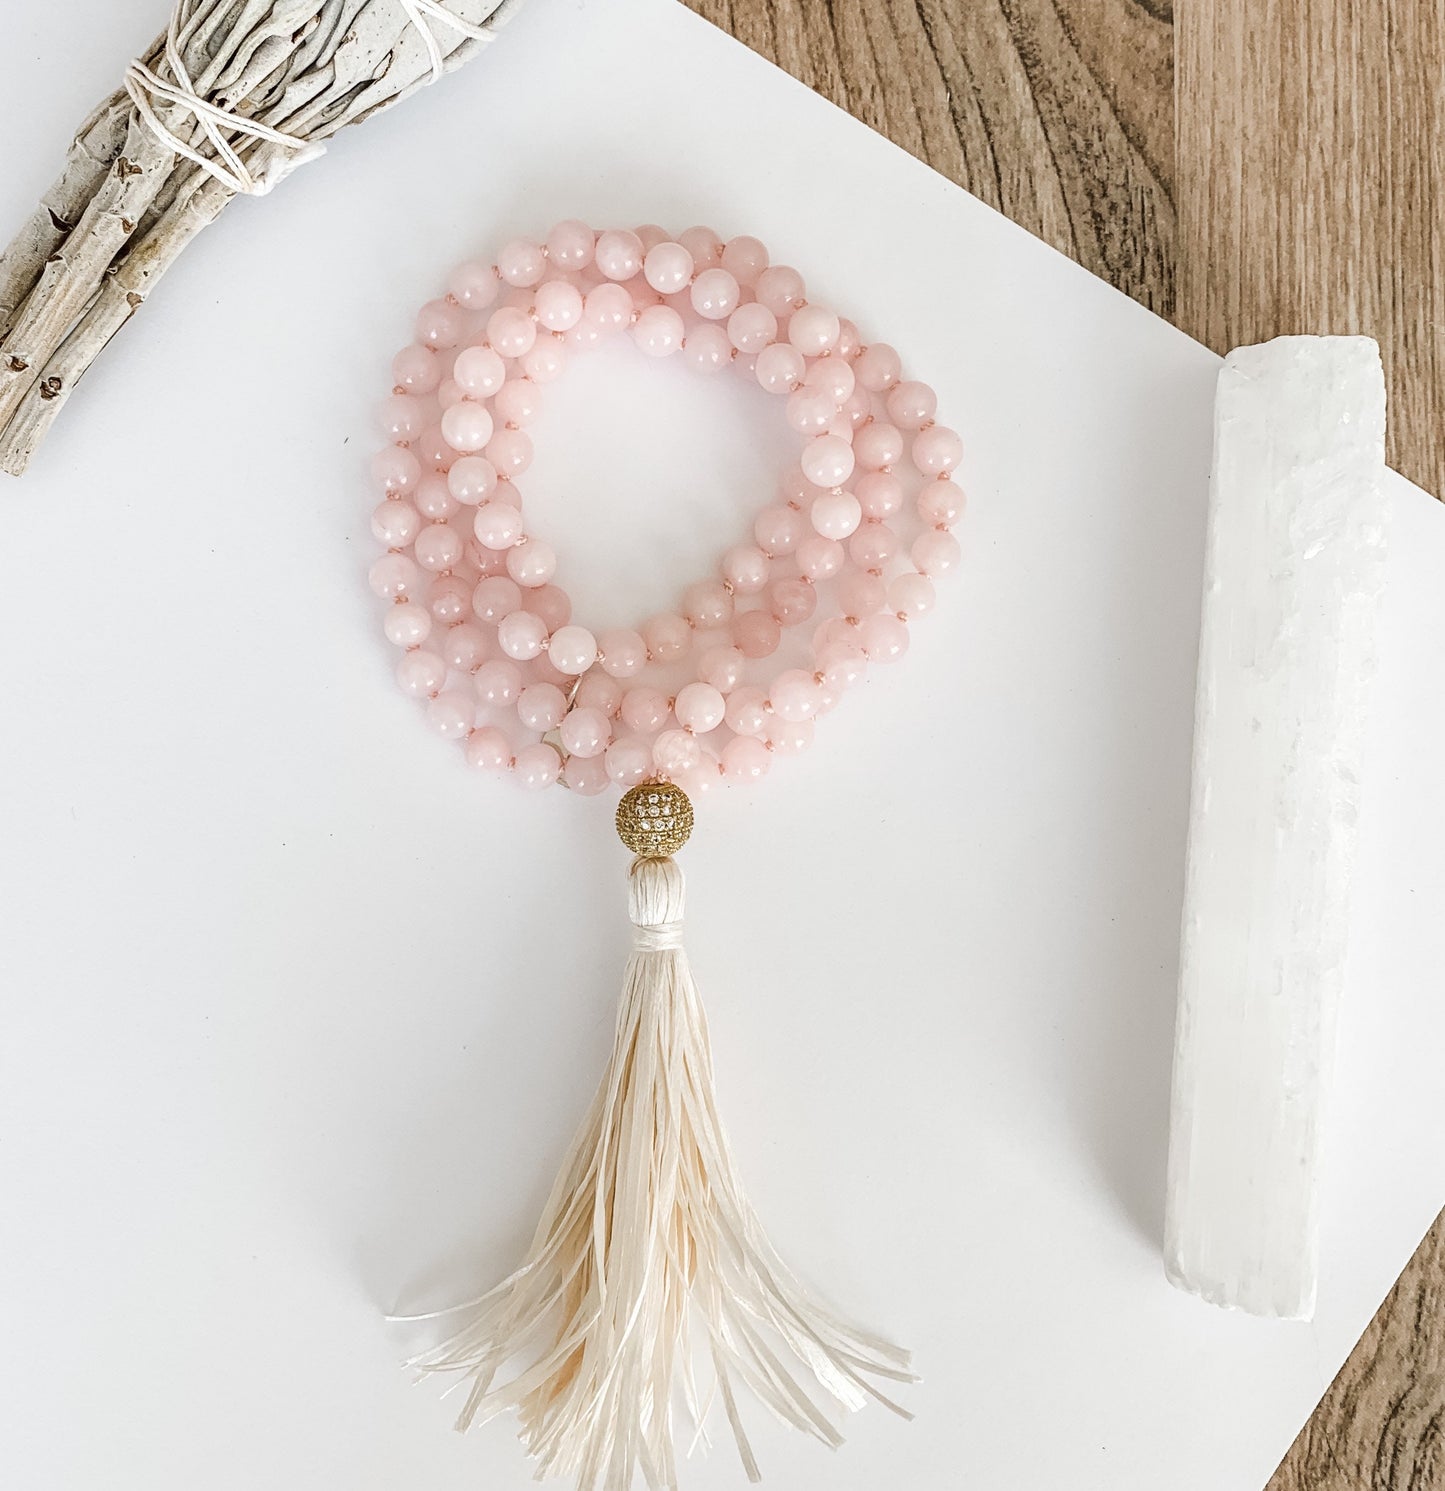 Mala Beads for Love and Friendship, Rose Quartz with a Pave' CZ Guru Bead